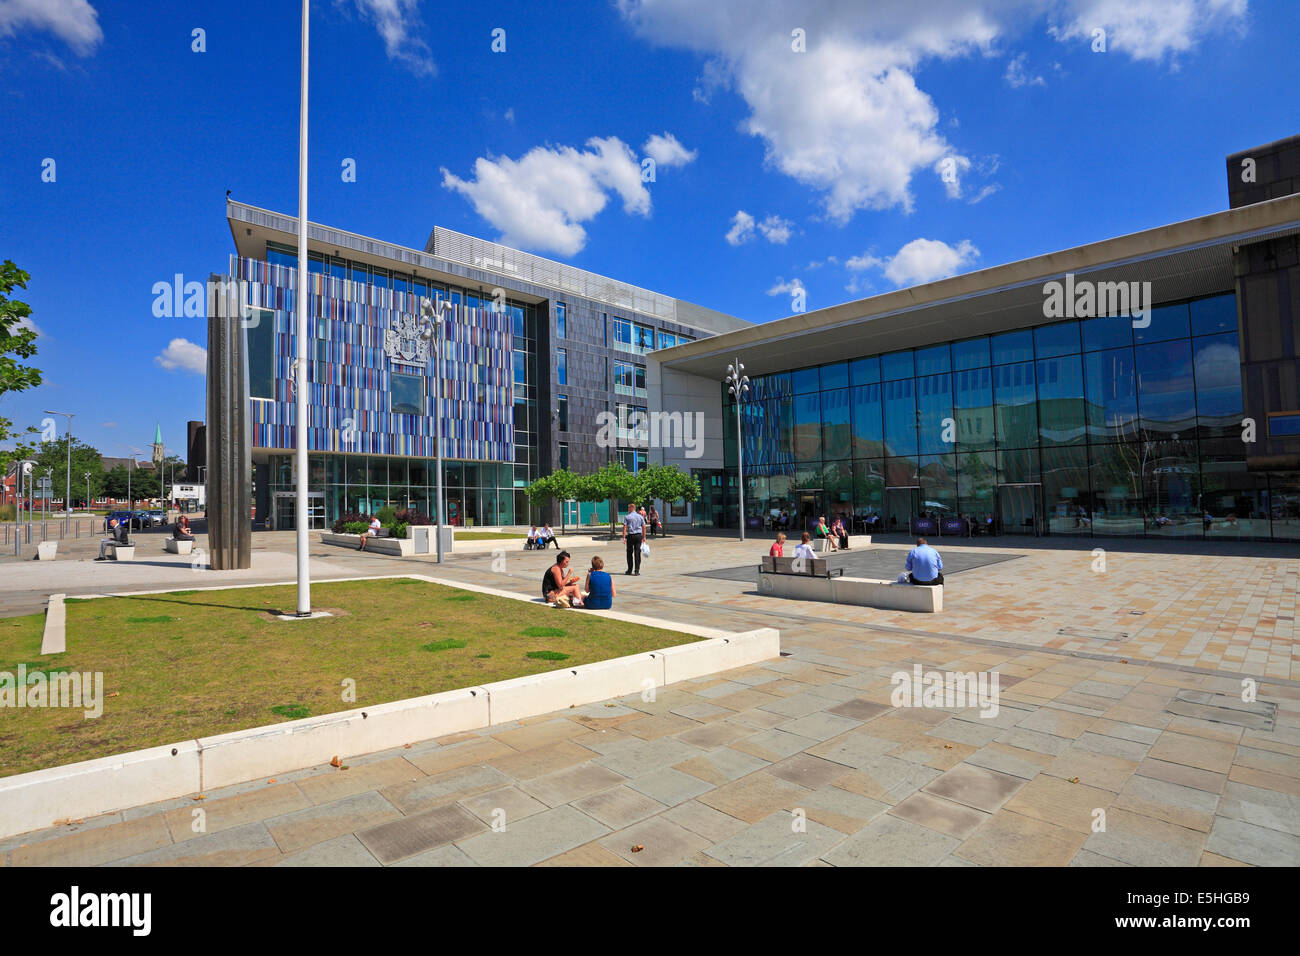 Civic Office and Cast Performance Venue in Sir Nigel Gresley Square,  Waterdale, Doncaster, South Yorkshire, England, UK. Stock Photo